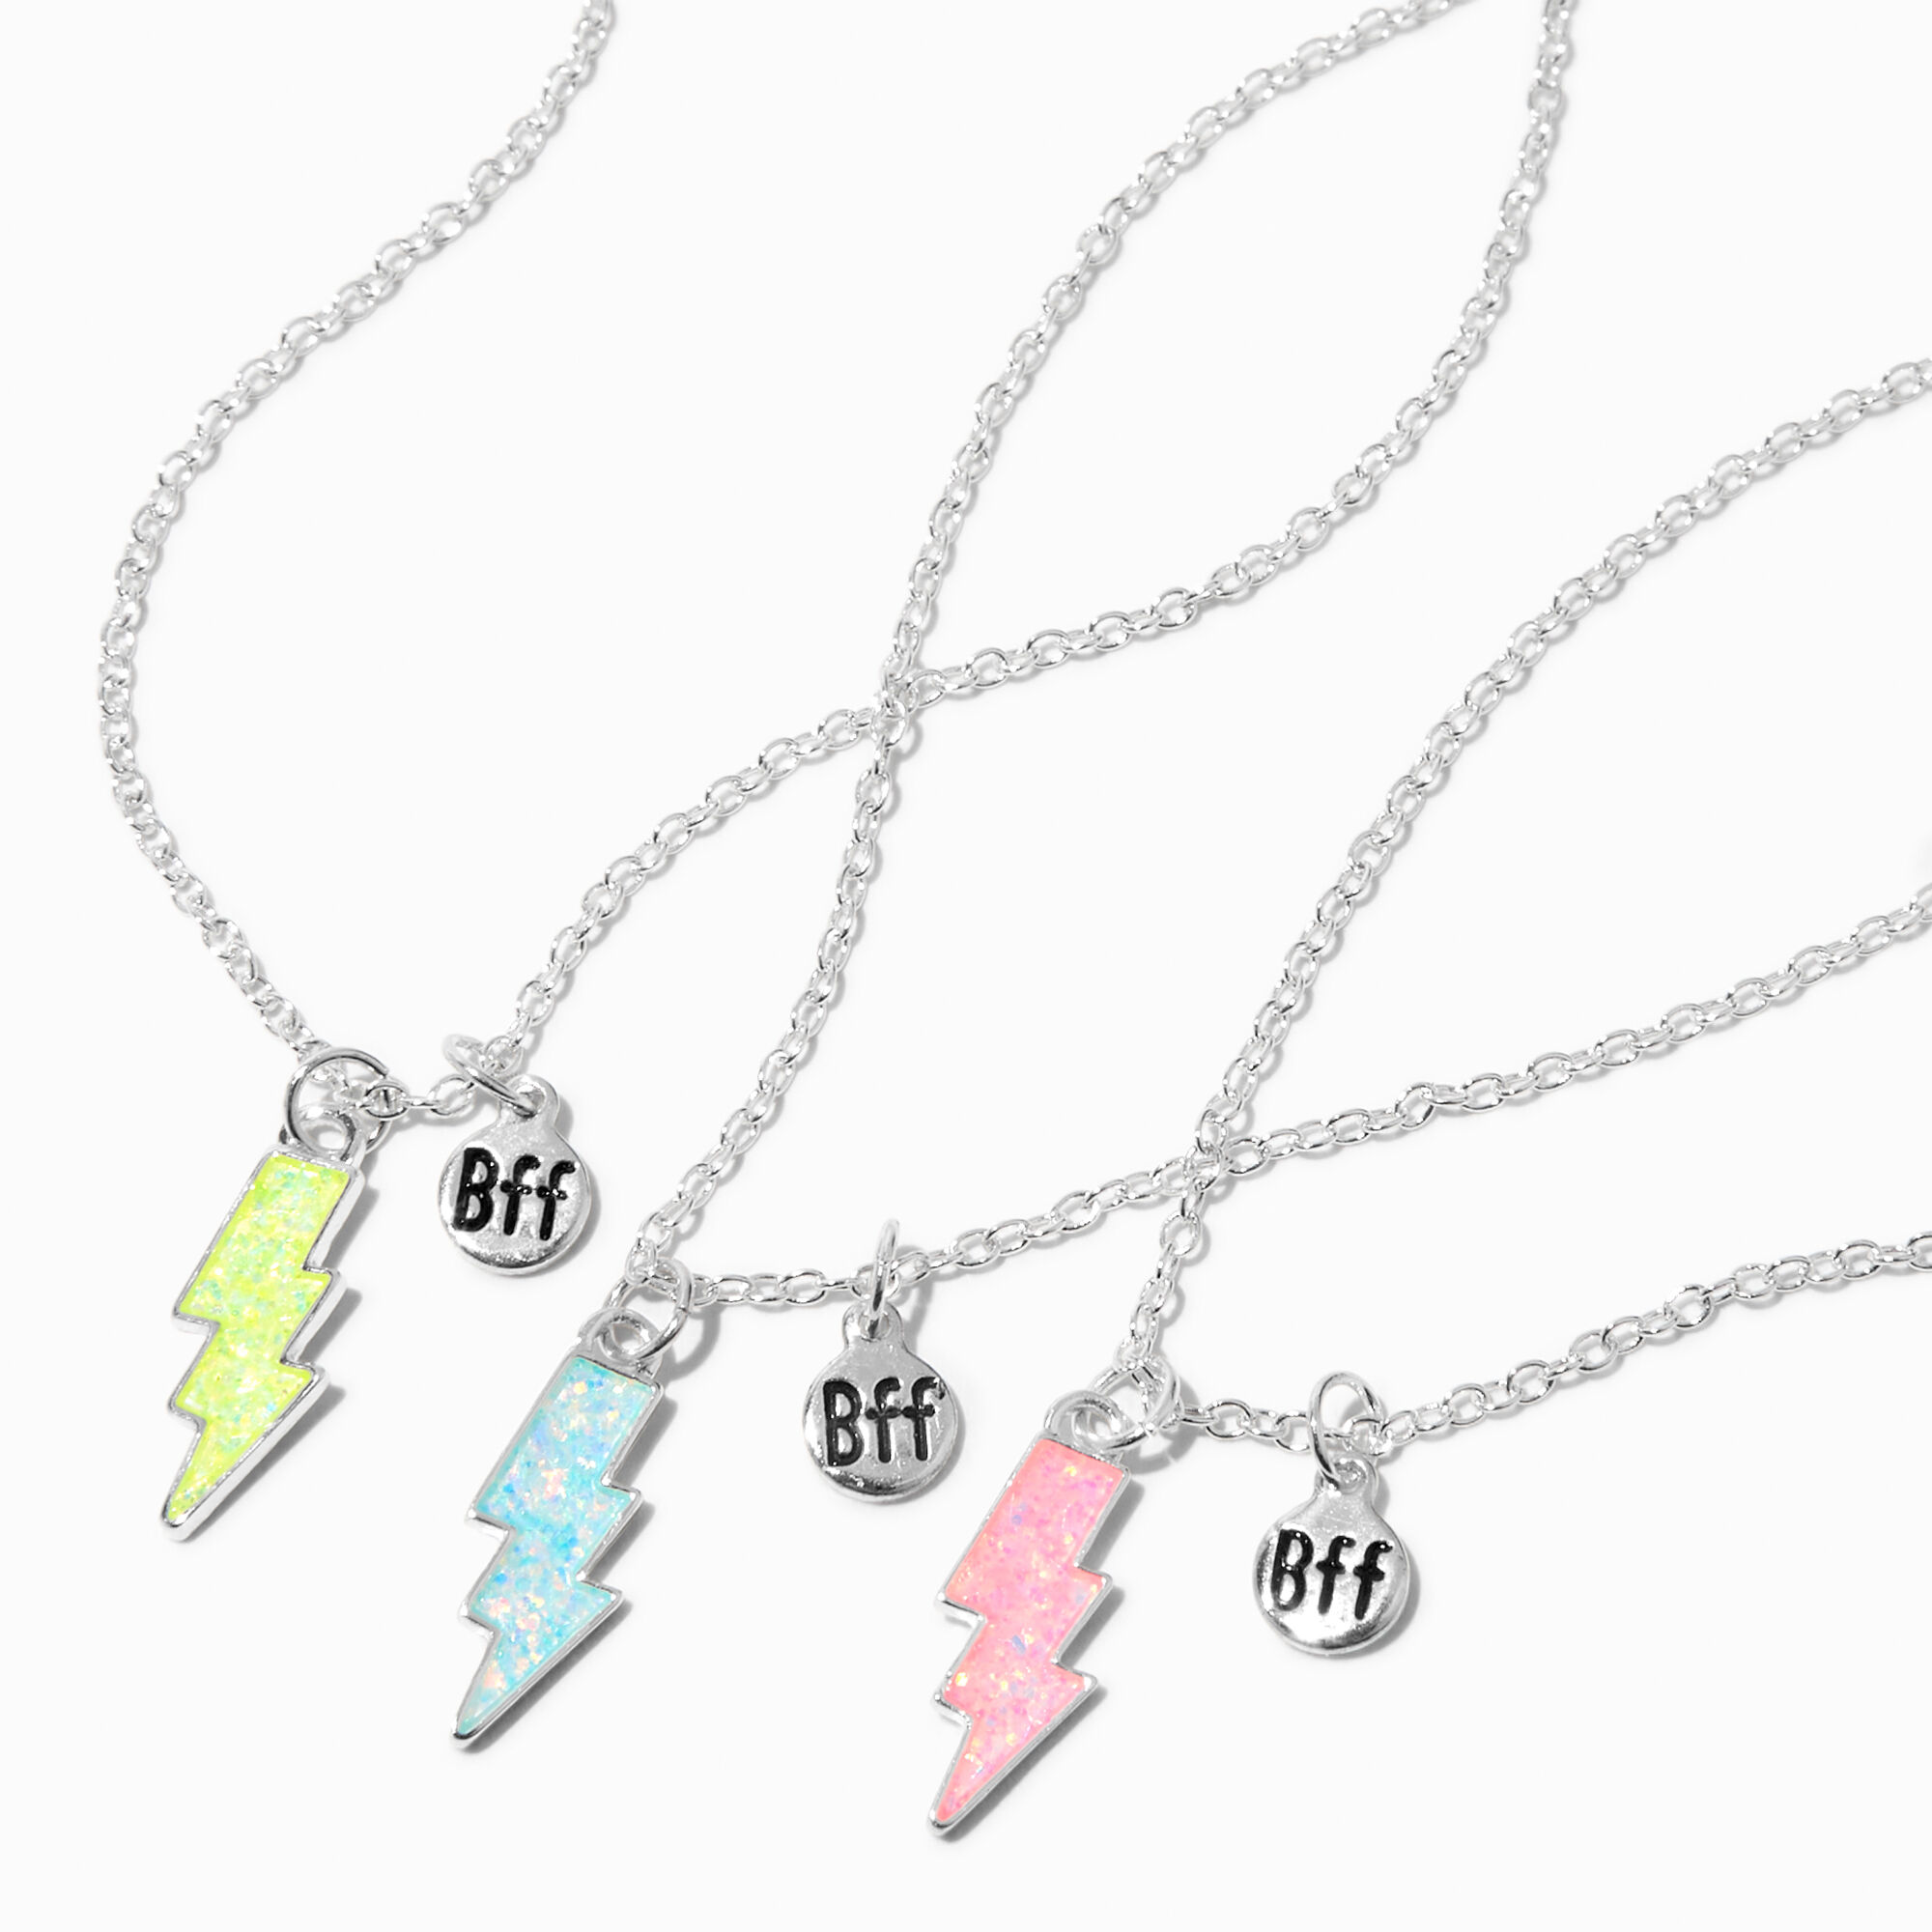 View Claires Best Friends Lightning Bolt Uv ColourChanging Pendant Necklaces 3 Pack Silver information